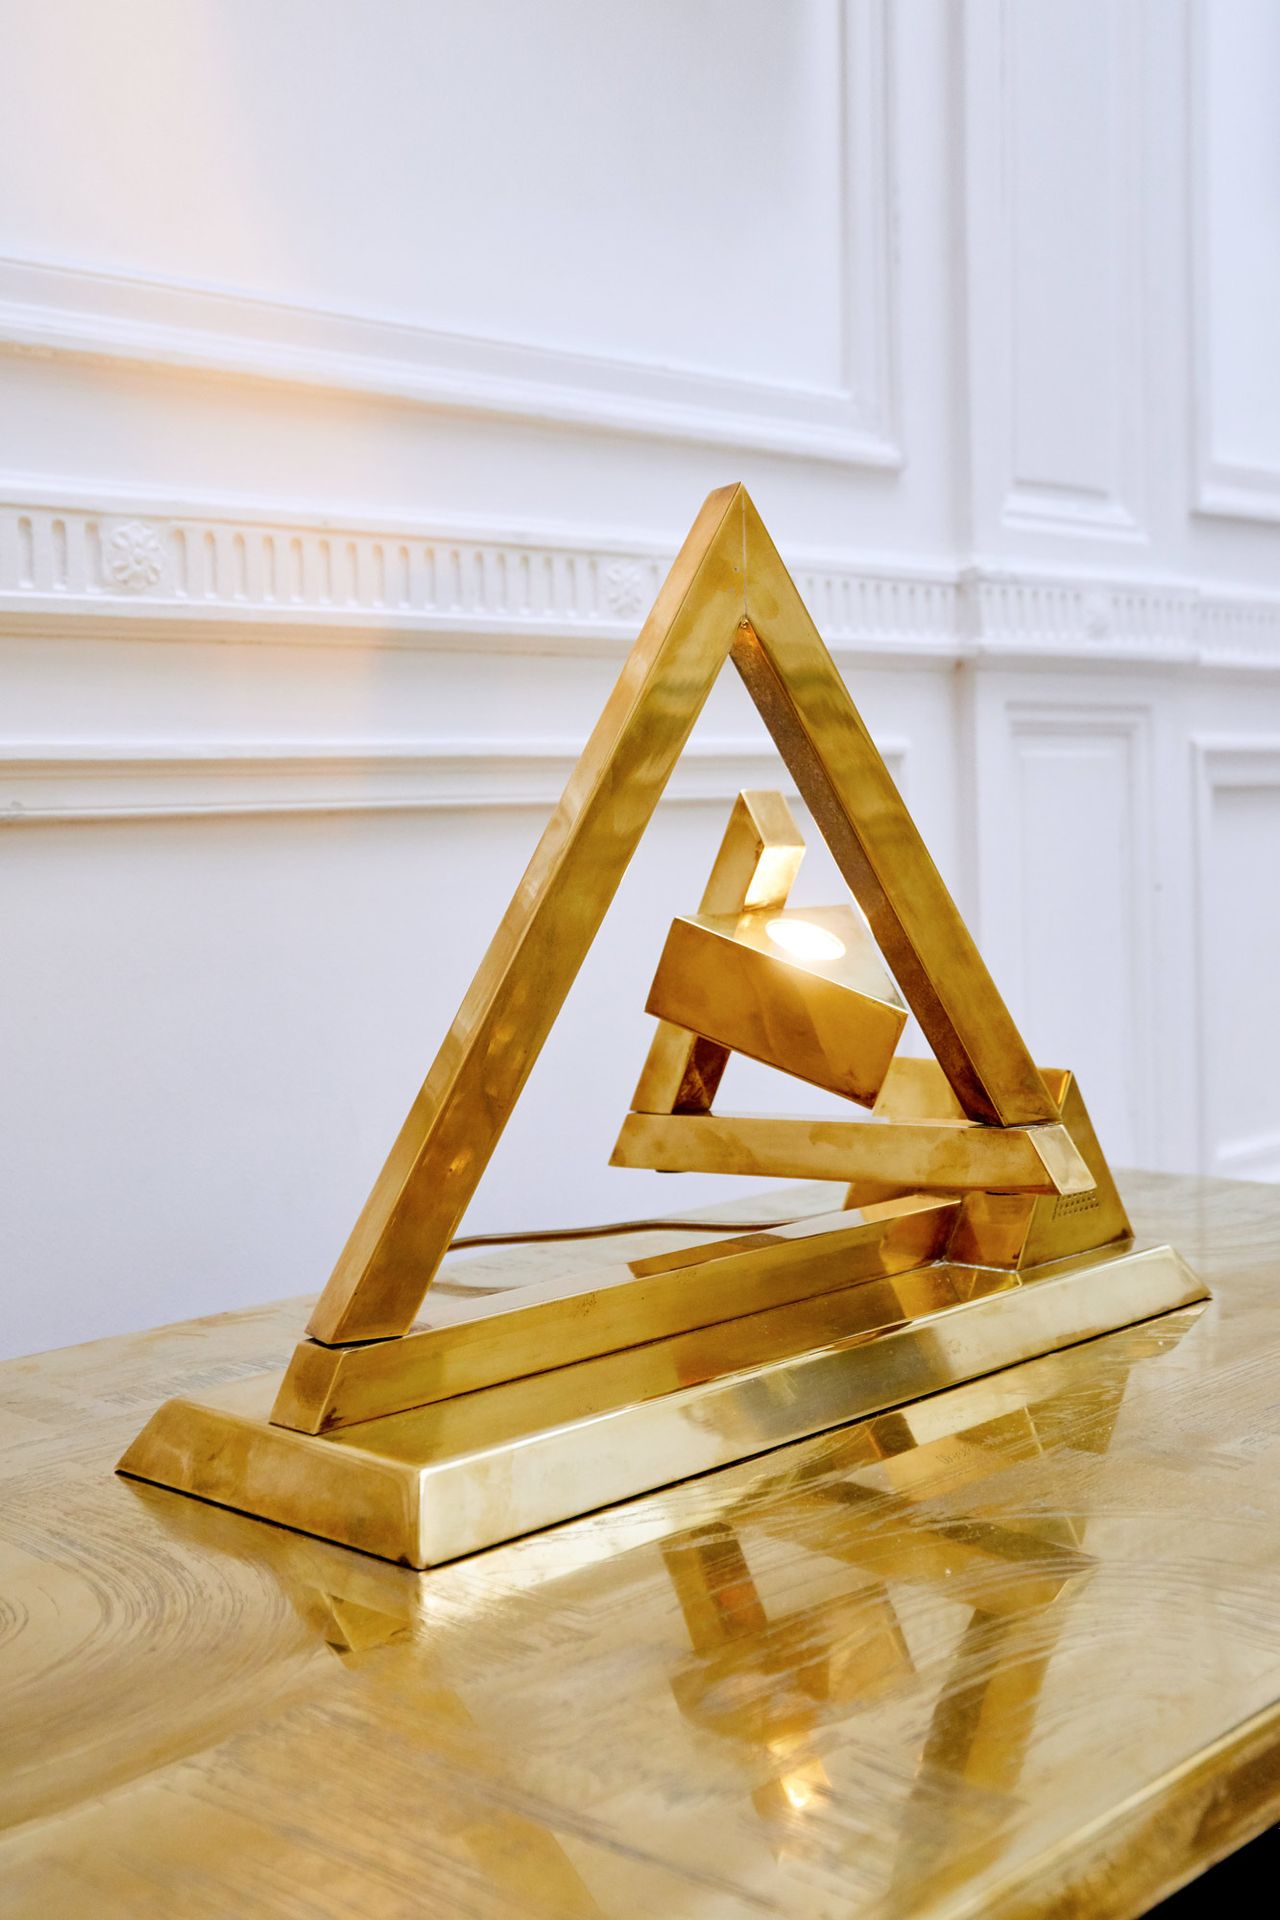 Yonel LEBOVICI (1937-1998) Pentograph Pyramid

Lamp 
Gilded brass, with triangul&hellip;